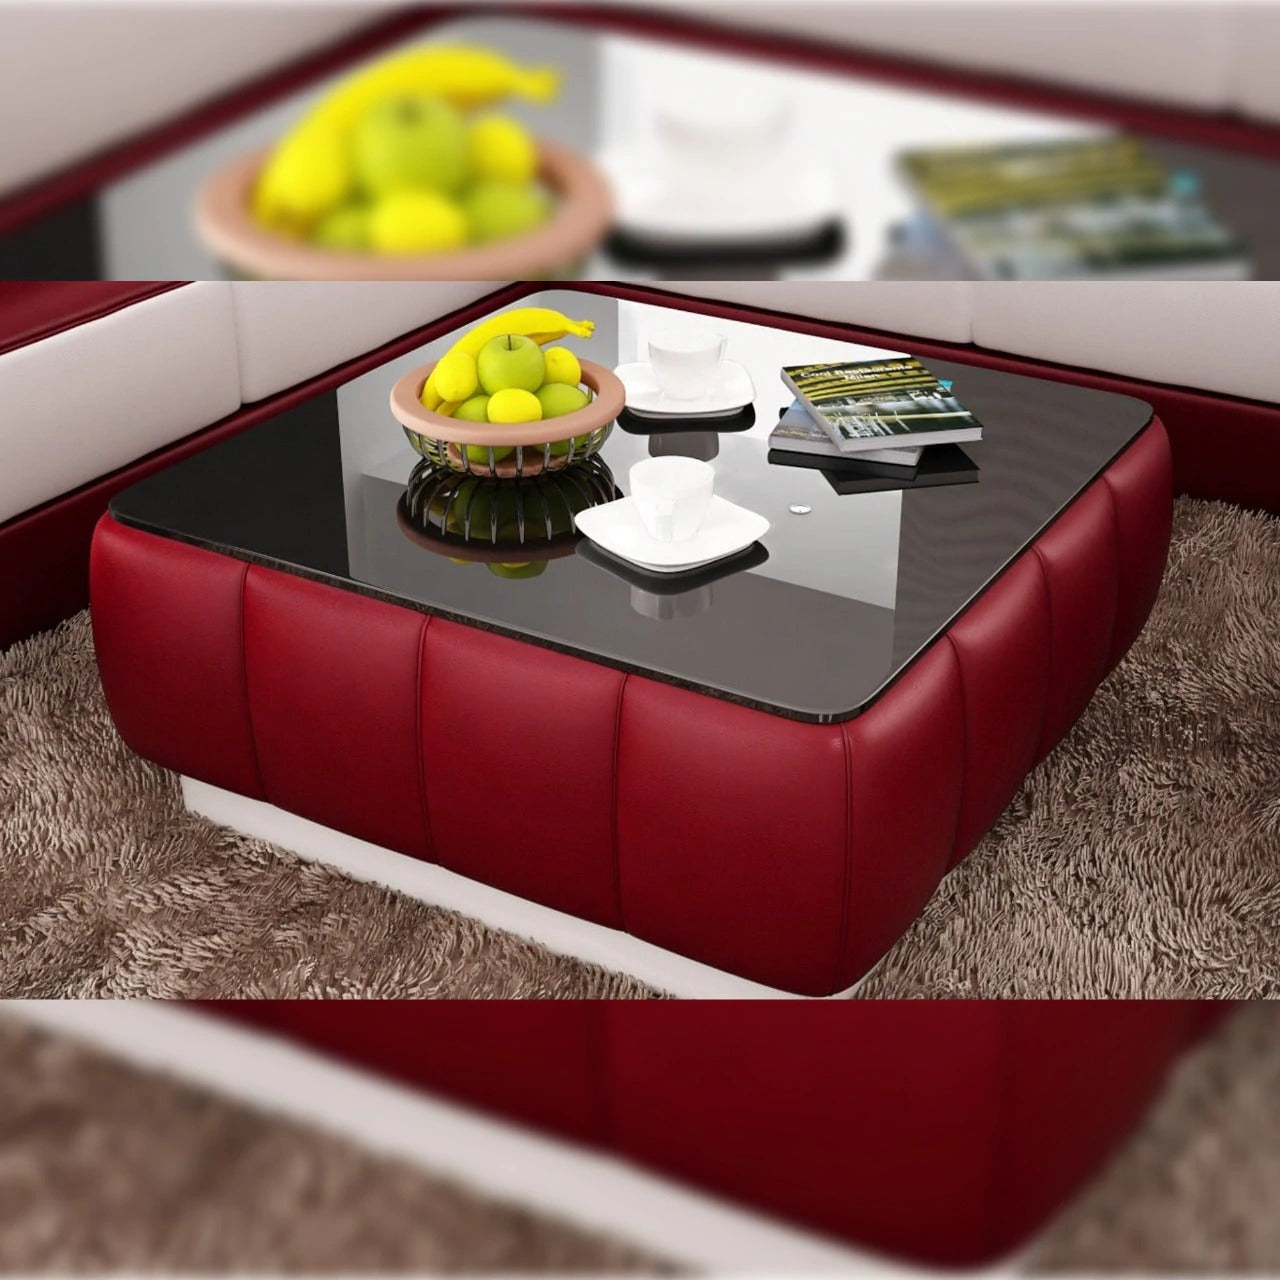 Latest Table Design For Your Home, Office, Living Room, Bedroom in 2022